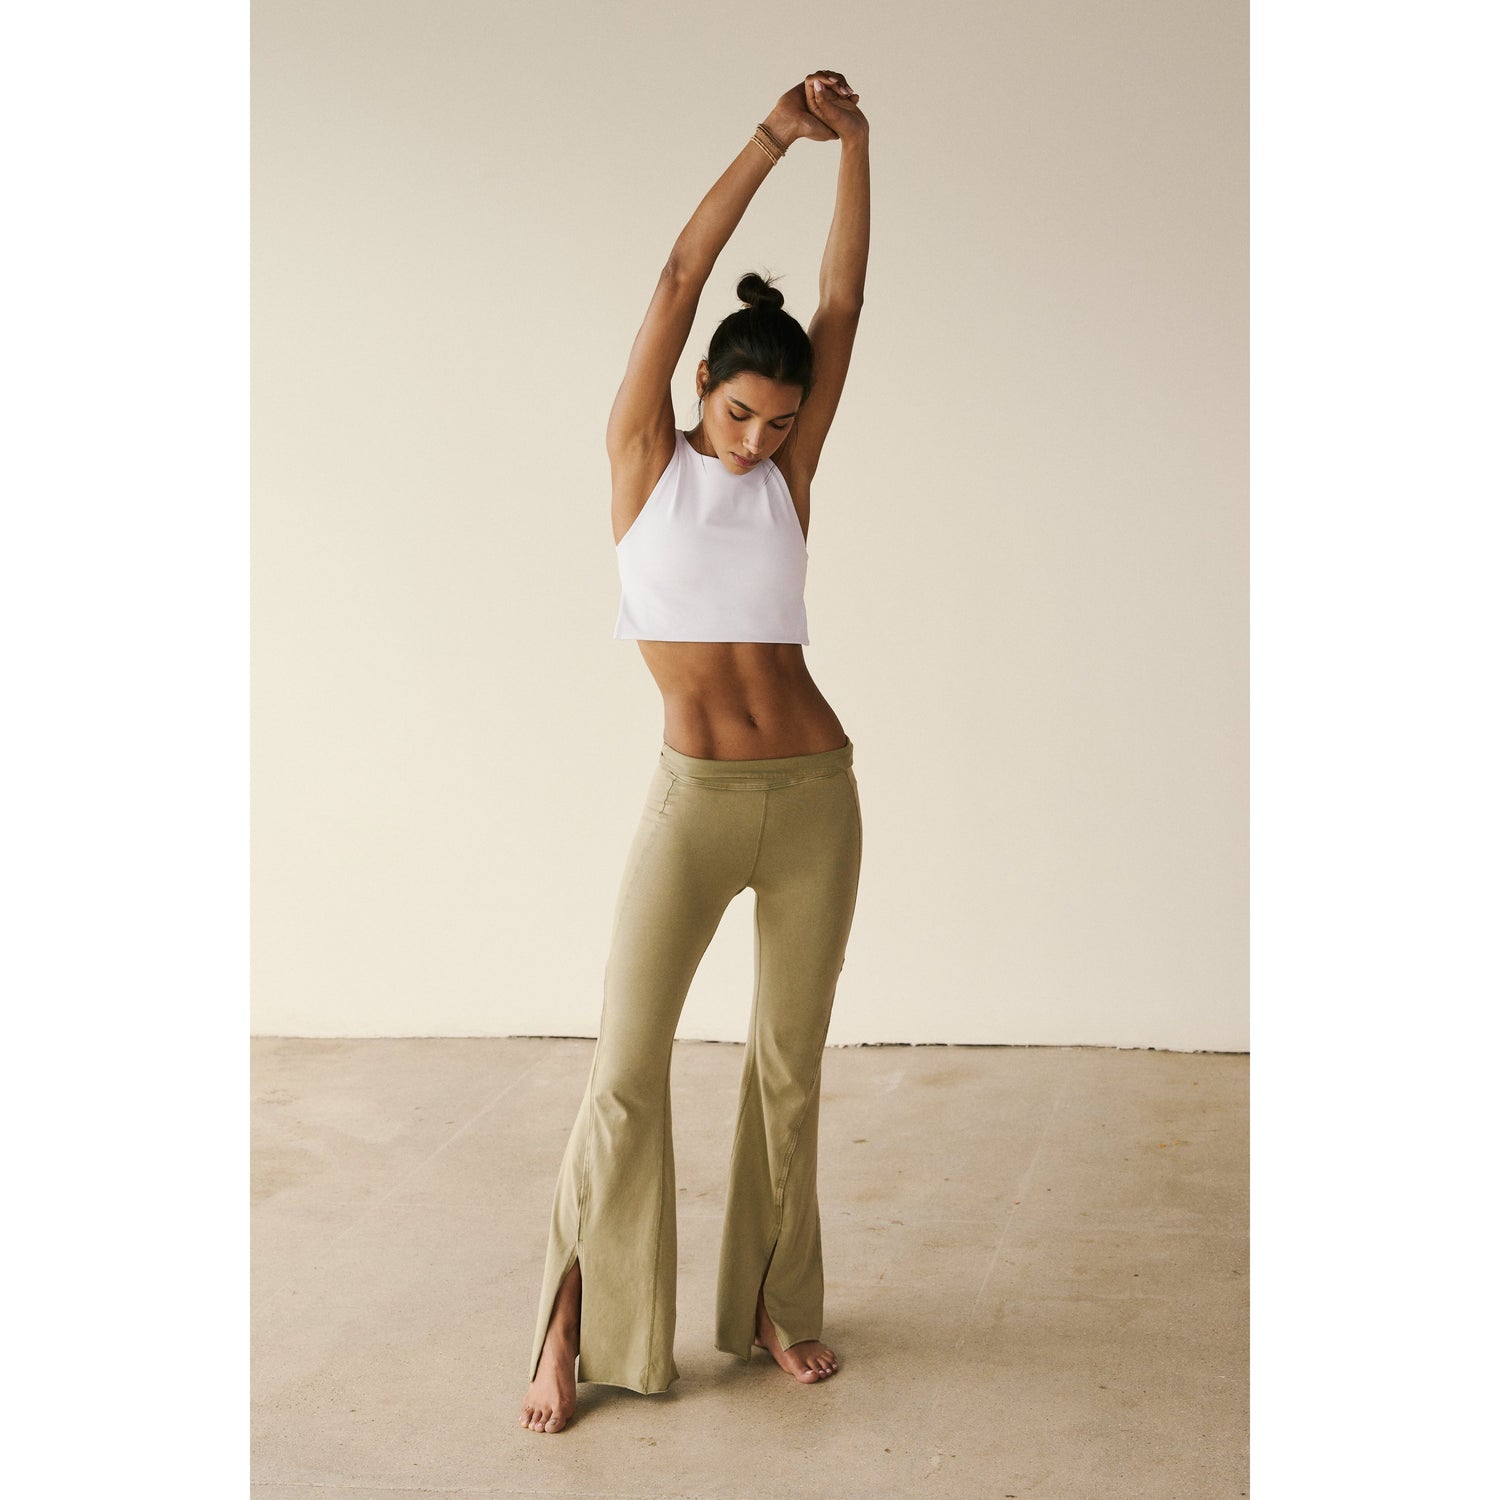 A woman in a Free People Movement Be Right Back Cami in White and green pants stretches her arms above her head in a bright room.